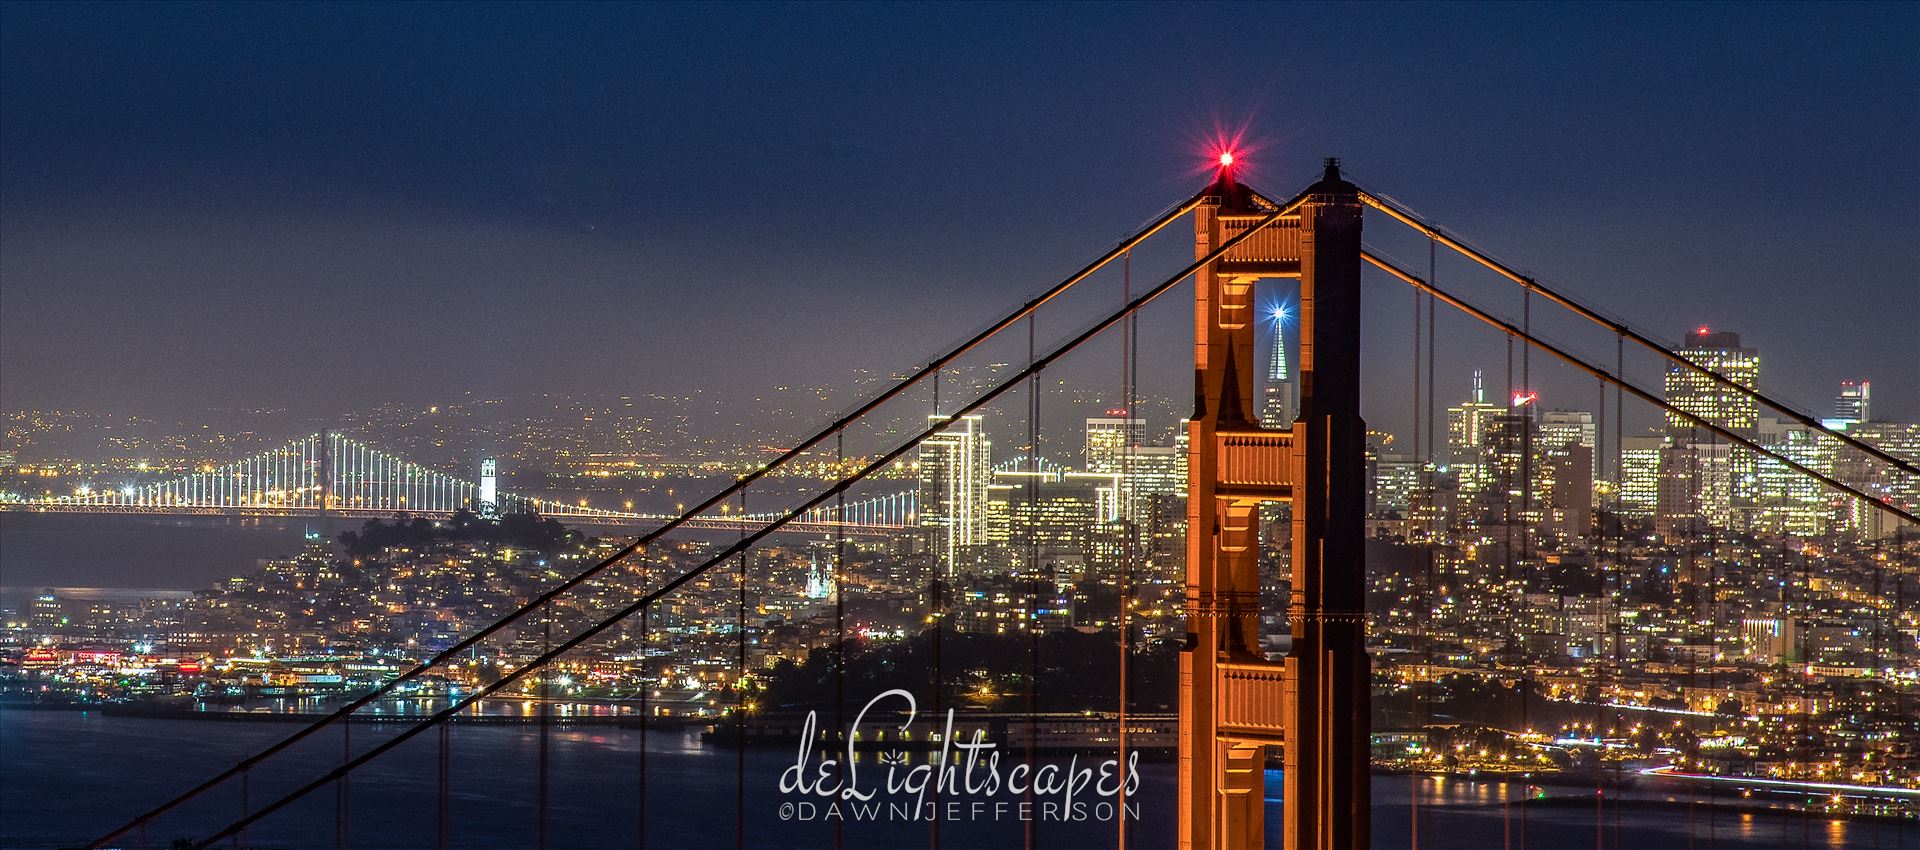 San Francisco Dressed for the Holidays  by Dawn Jefferson